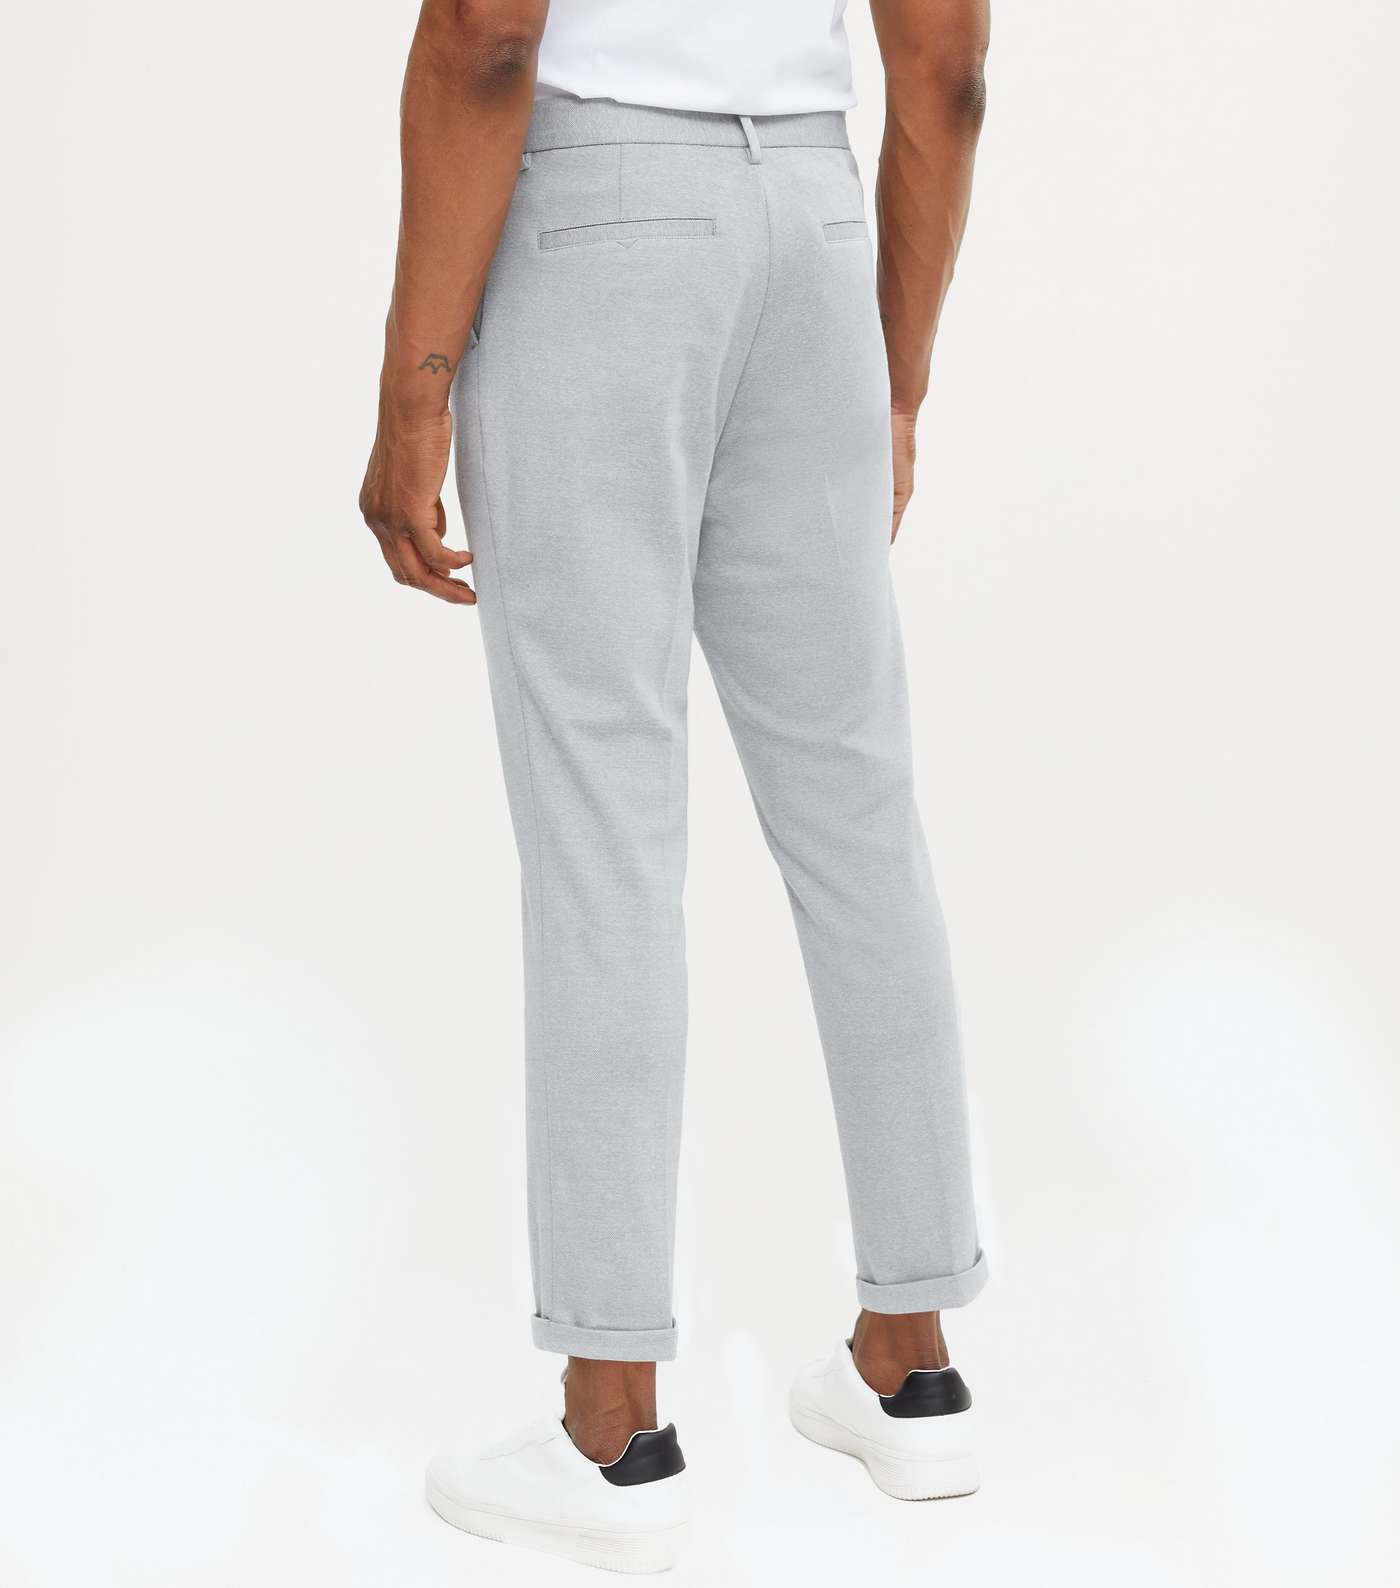 Pale Grey Cuffed Slim Fit Trousers Image 4